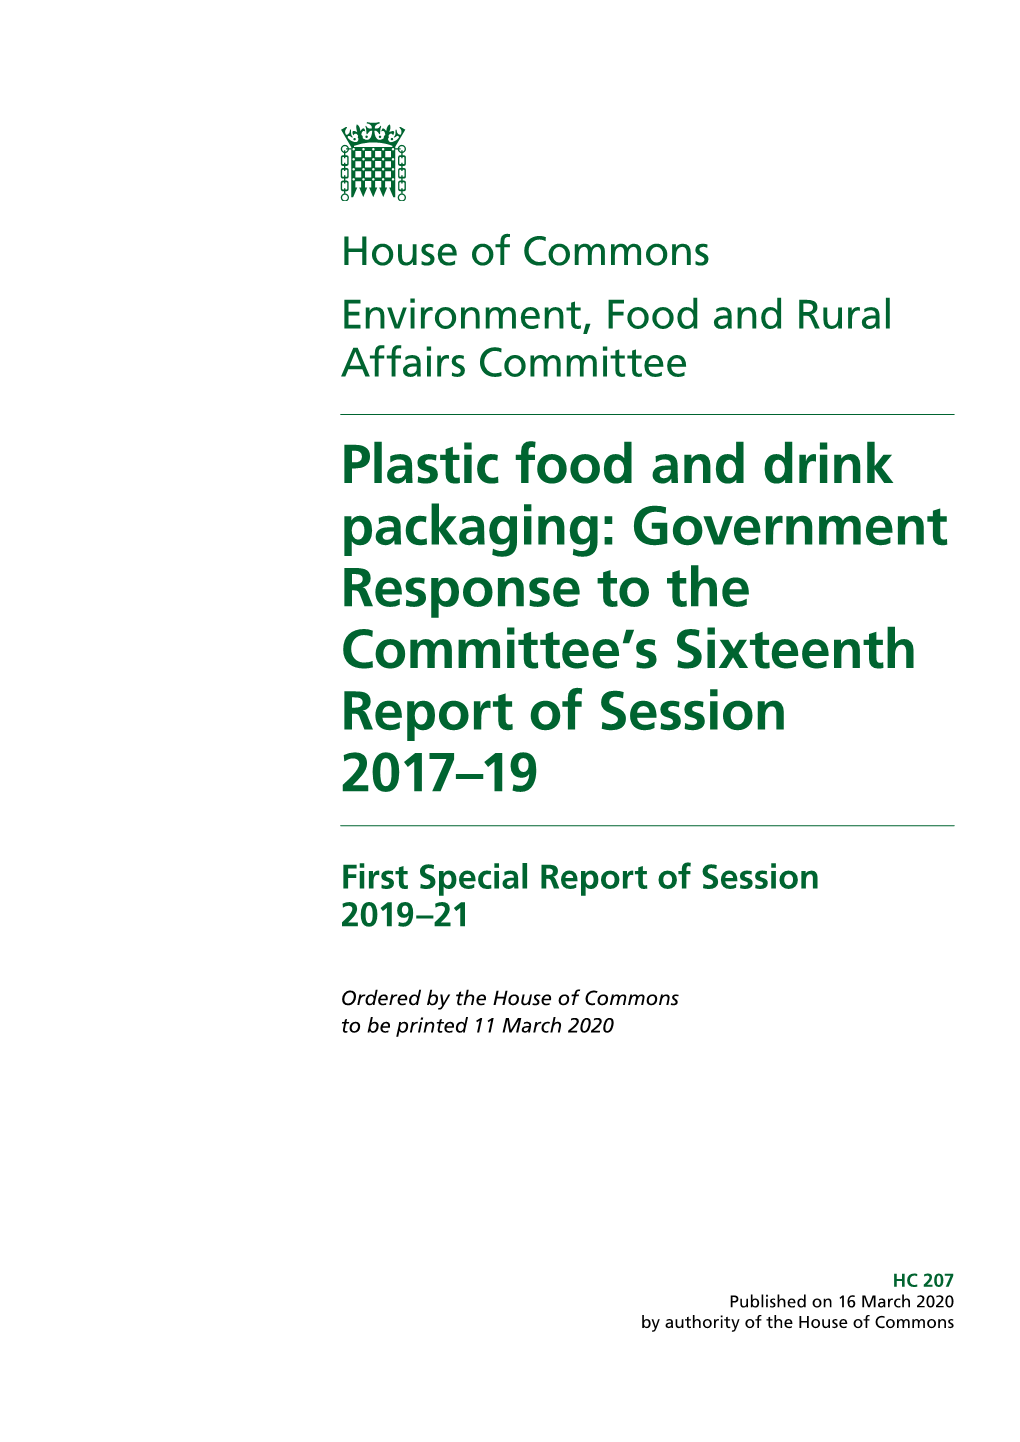 Plastic Food and Drink Packaging: Government Response to the Committee’S Sixteenth Report of Session 2017–19